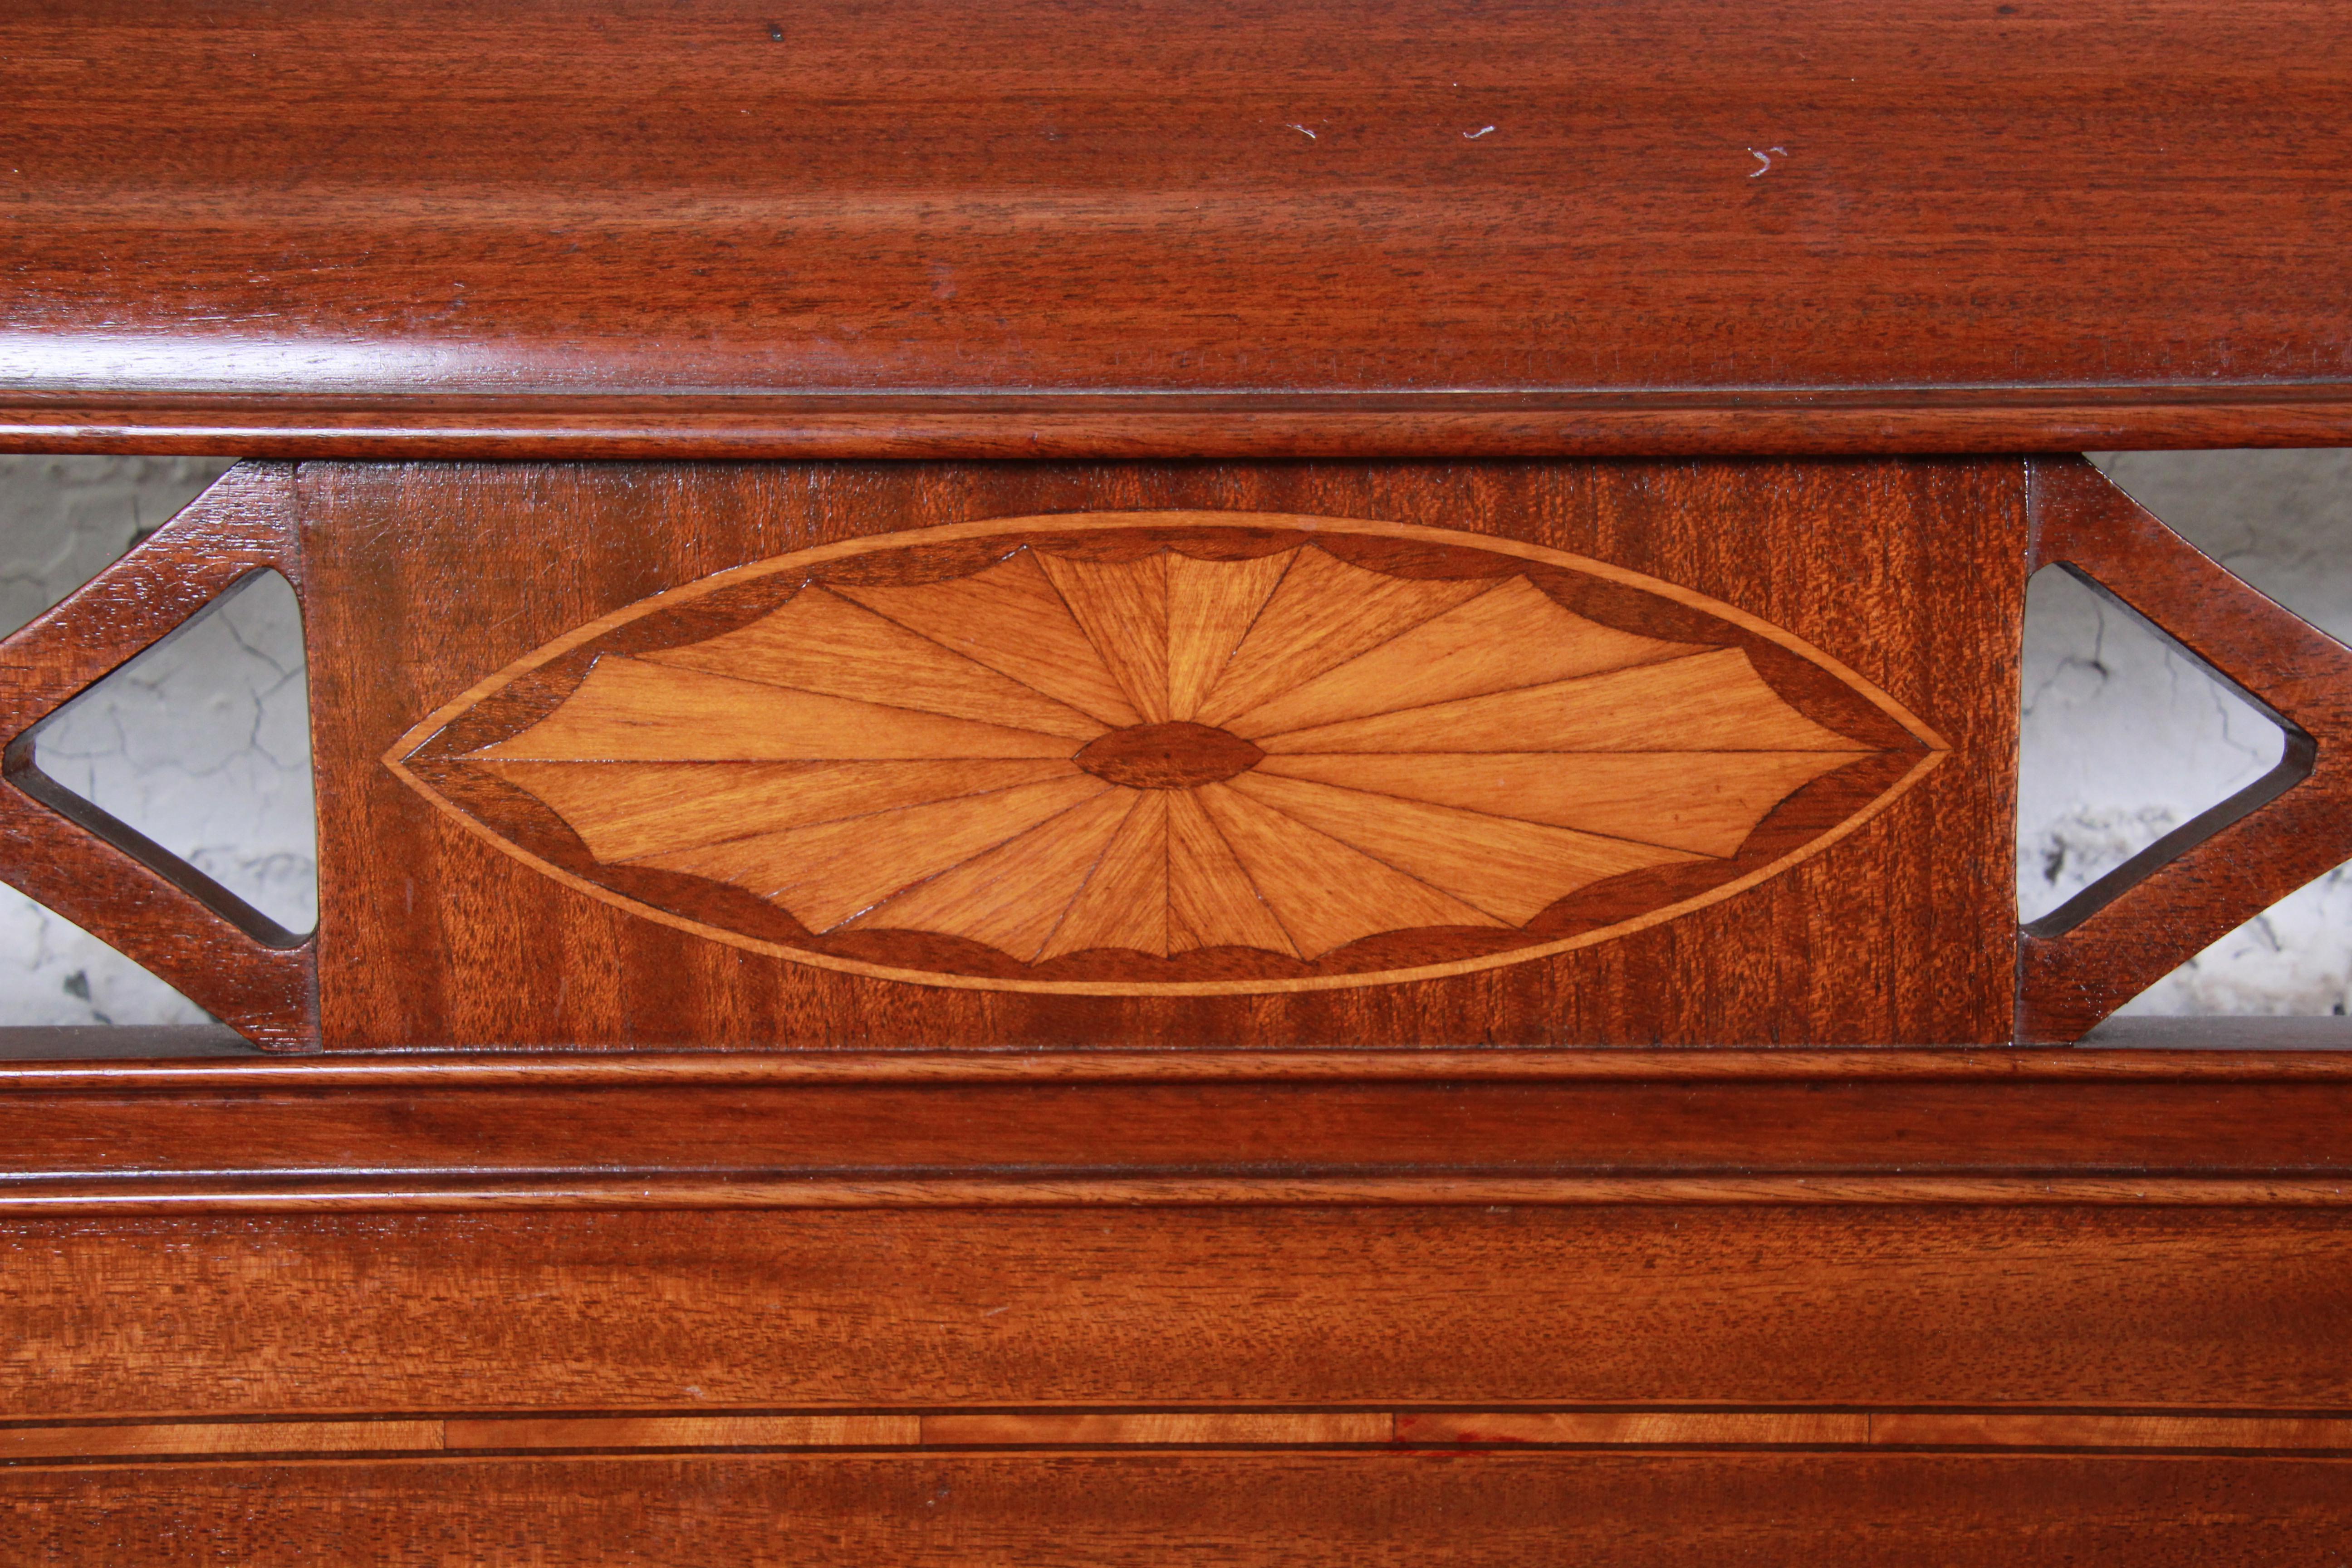 British Colonial Pair of Inlaid Mahogany Federal Style Twin Beds by Kindel Furniture